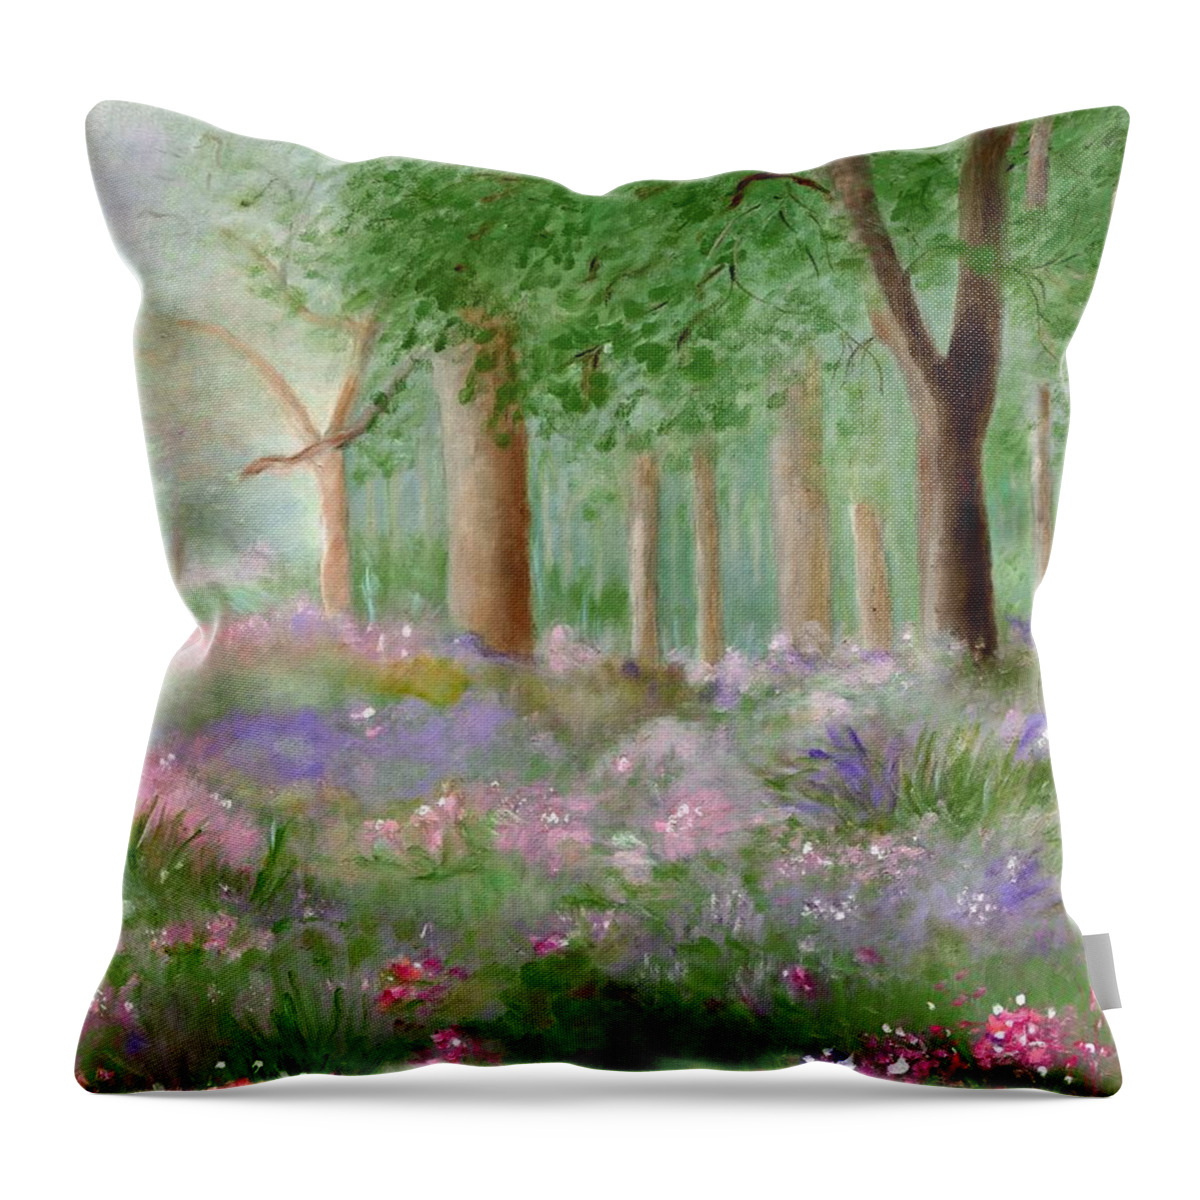 Field Of Flowers Throw Pillow featuring the painting Mystic Moment by Juliette Becker